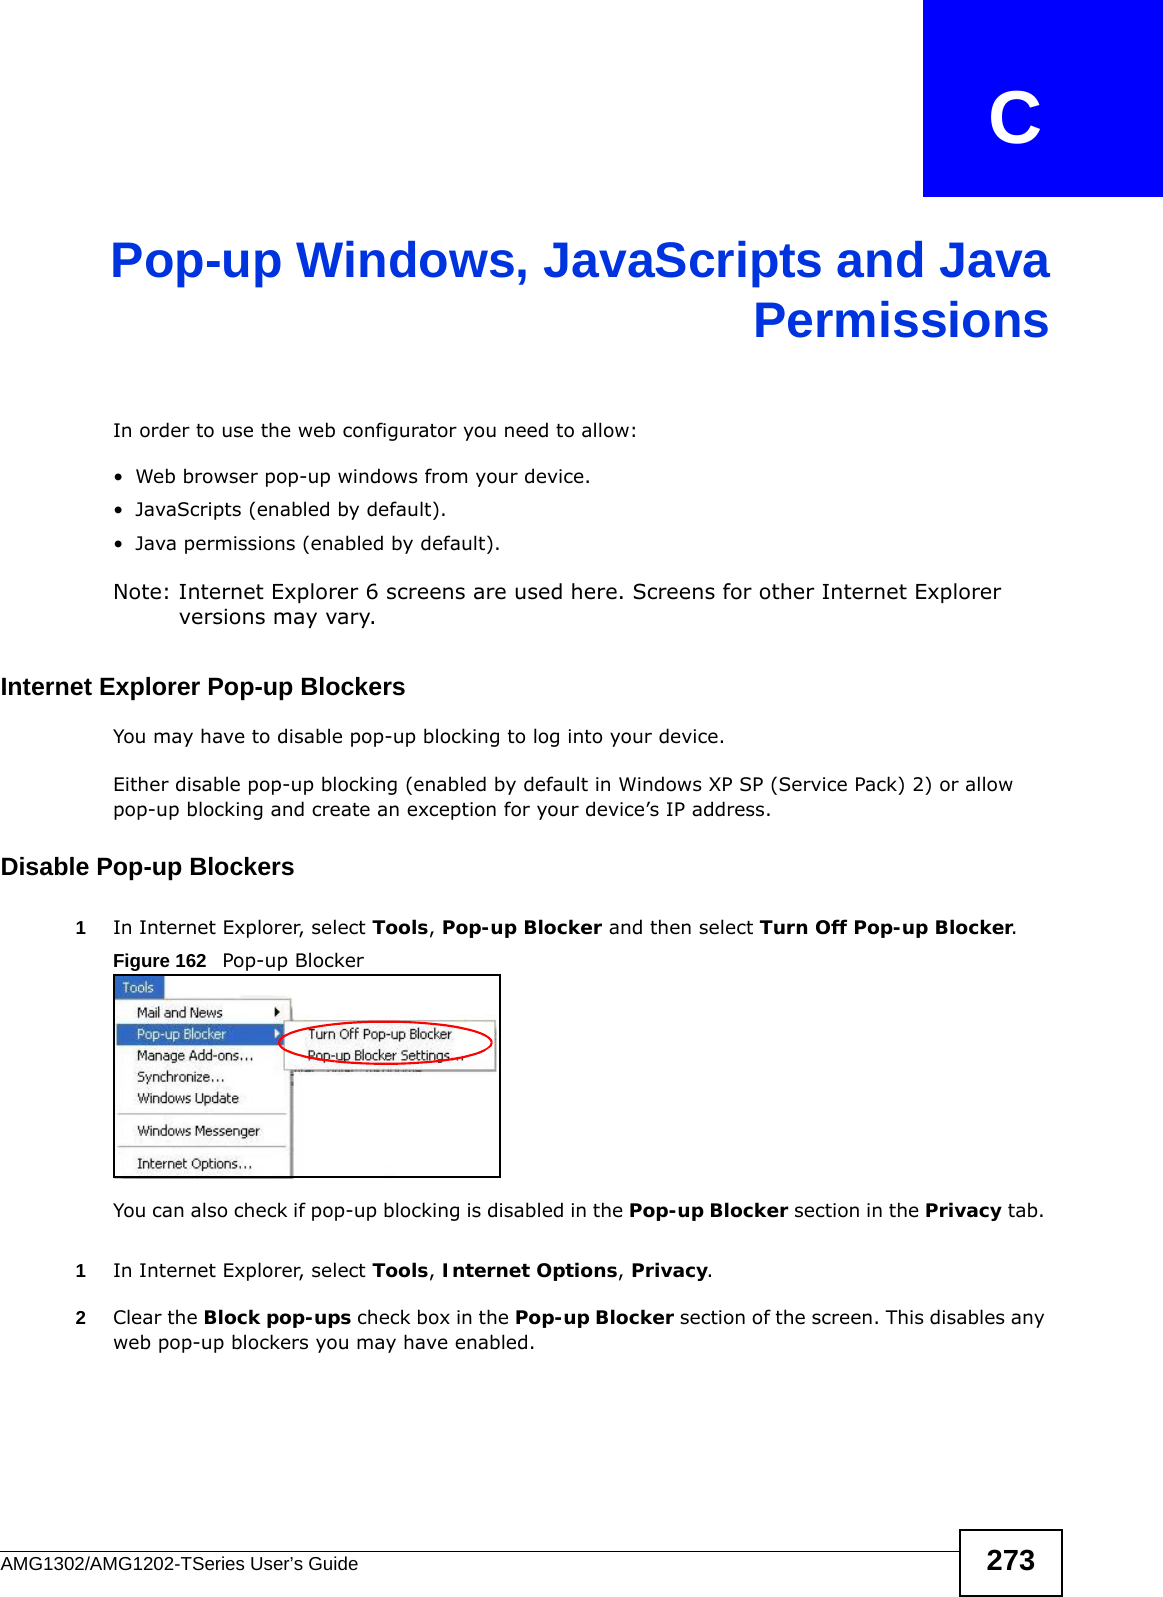 AMG1302/AMG1202-TSeries User’s Guide 273APPENDIX   CPop-up Windows, JavaScripts and JavaPermissionsIn order to use the web configurator you need to allow:• Web browser pop-up windows from your device.• JavaScripts (enabled by default).• Java permissions (enabled by default).Note: Internet Explorer 6 screens are used here. Screens for other Internet Explorer versions may vary.Internet Explorer Pop-up BlockersYou may have to disable pop-up blocking to log into your device. Either disable pop-up blocking (enabled by default in Windows XP SP (Service Pack) 2) or allow pop-up blocking and create an exception for your device’s IP address.Disable Pop-up Blockers1In Internet Explorer, select Tools, Pop-up Blocker and then select Turn Off Pop-up Blocker. Figure 162   Pop-up BlockerYou can also check if pop-up blocking is disabled in the Pop-up Blocker section in the Privacy tab. 1In Internet Explorer, select Tools, Internet Options, Privacy.2Clear the Block pop-ups check box in the Pop-up Blocker section of the screen. This disables any web pop-up blockers you may have enabled. 